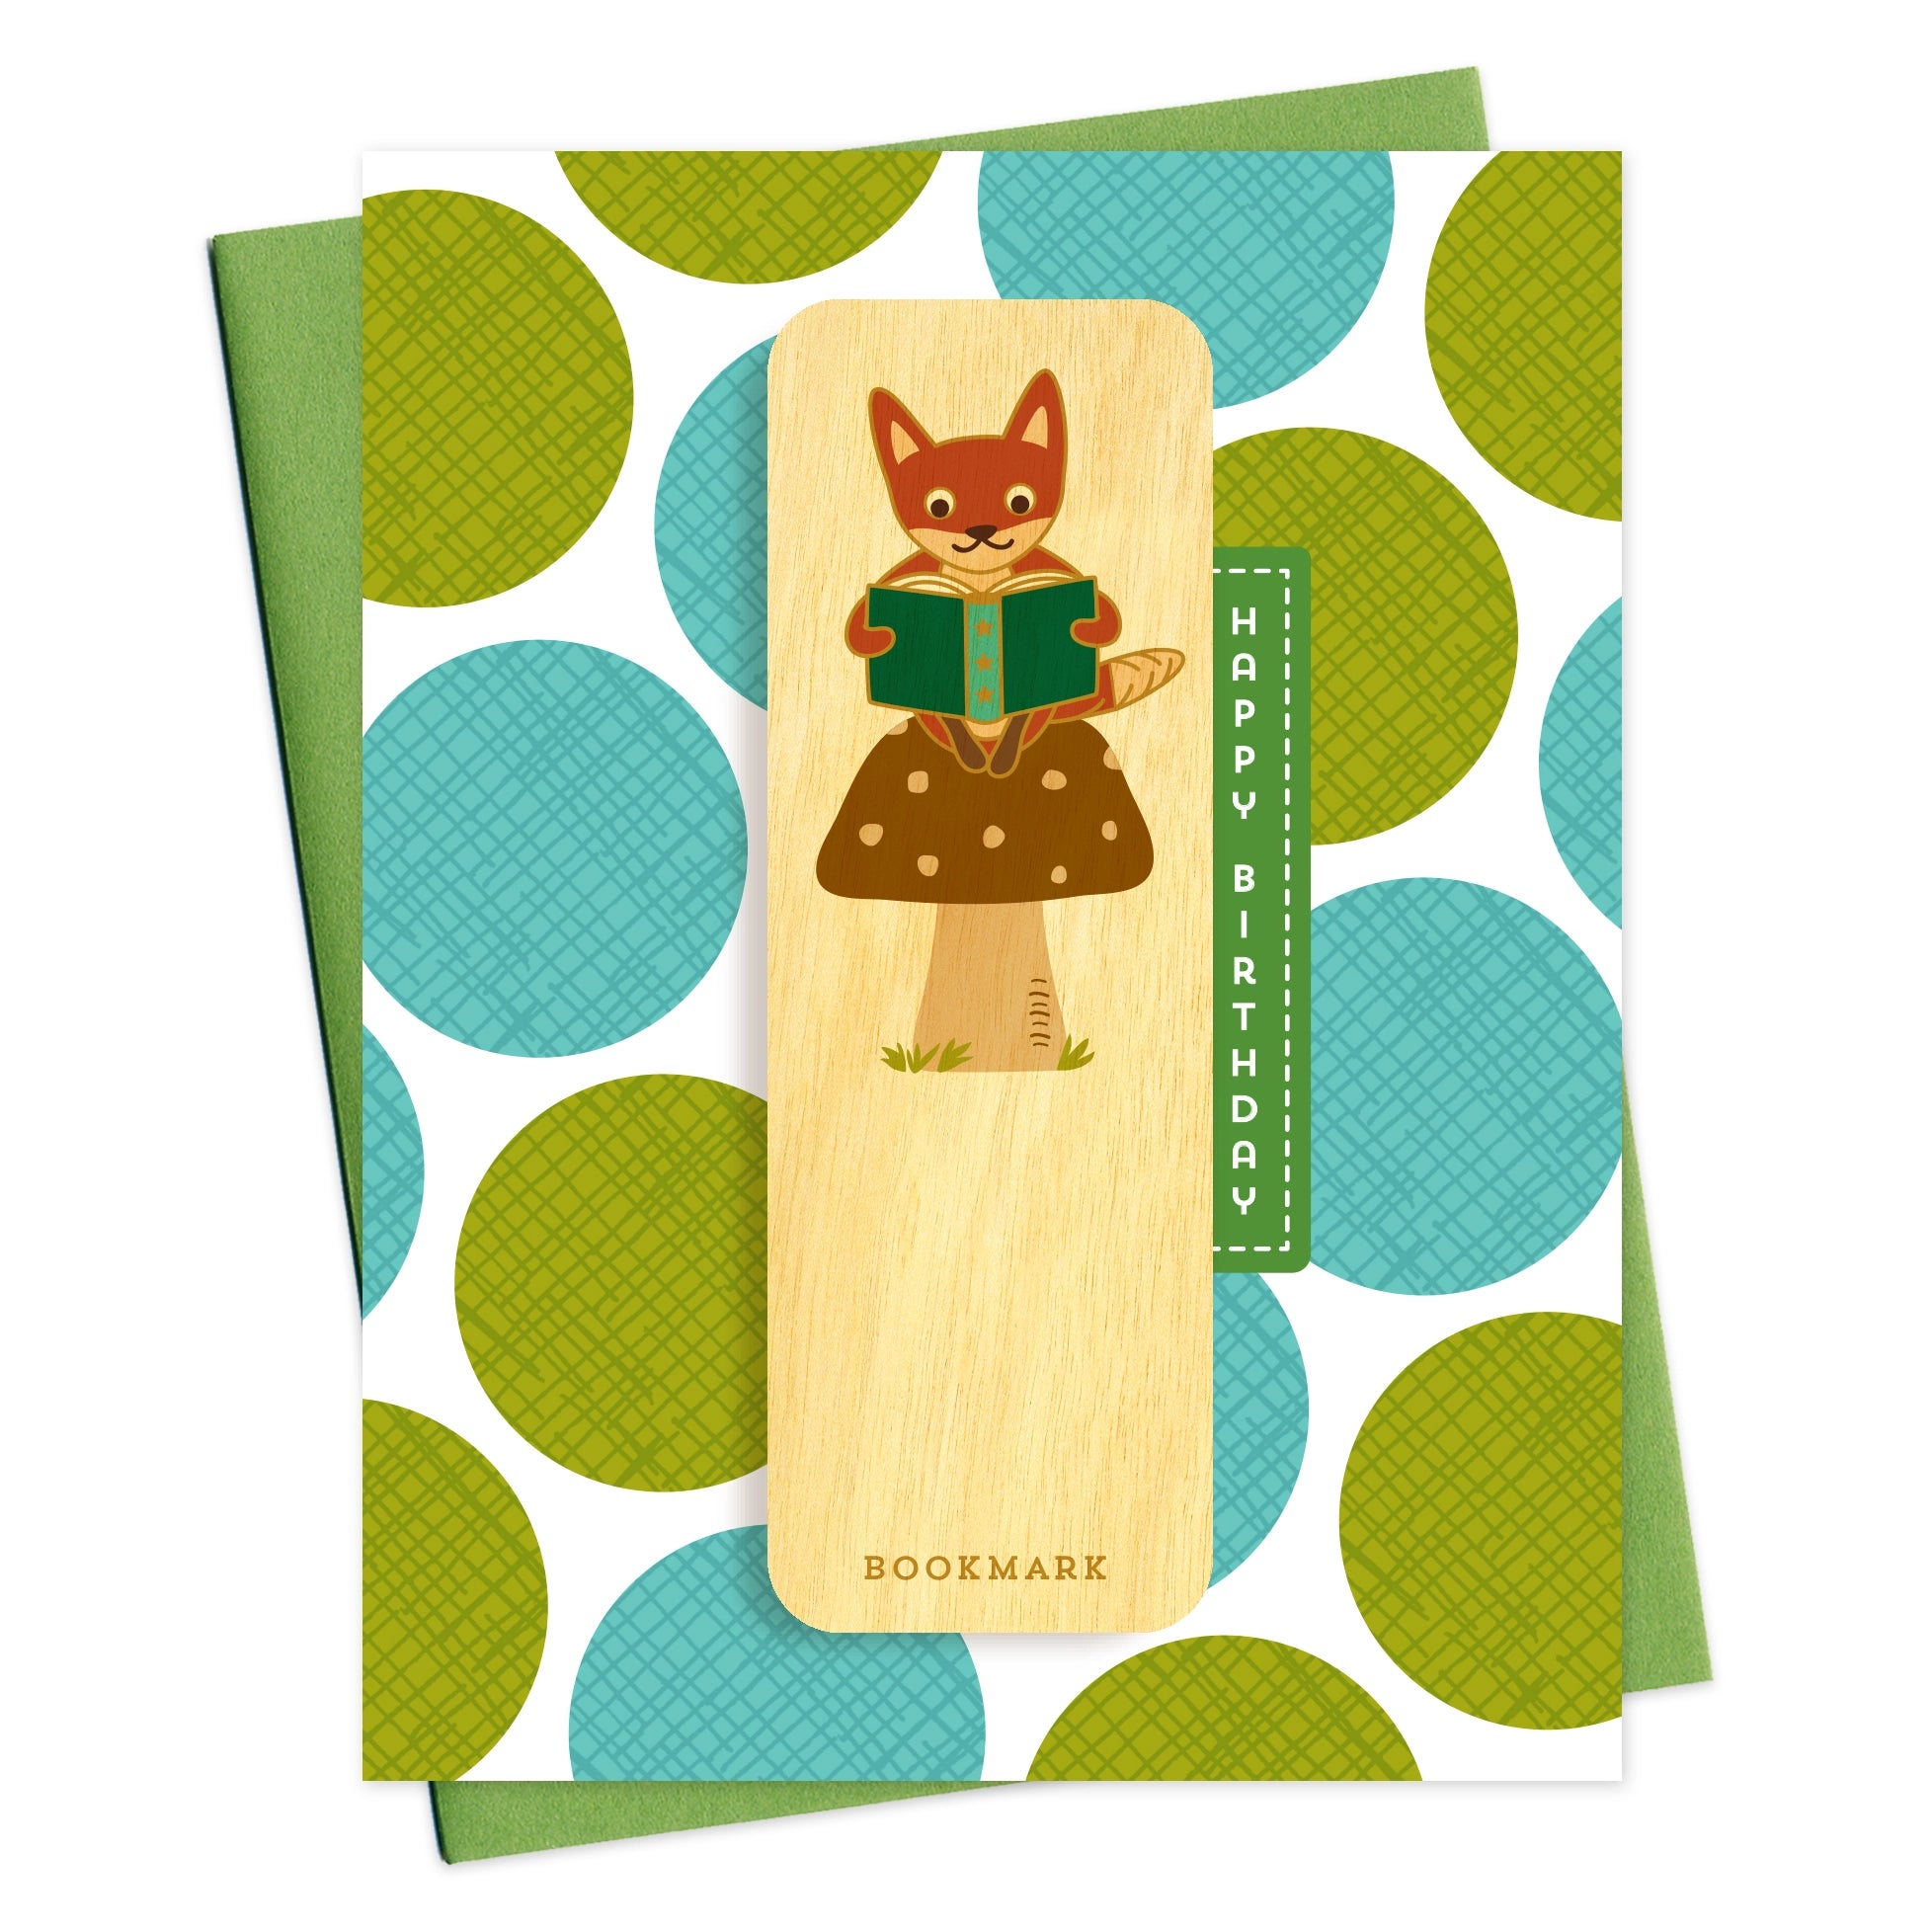 Bookmark Greeting Card - Foxy Fables